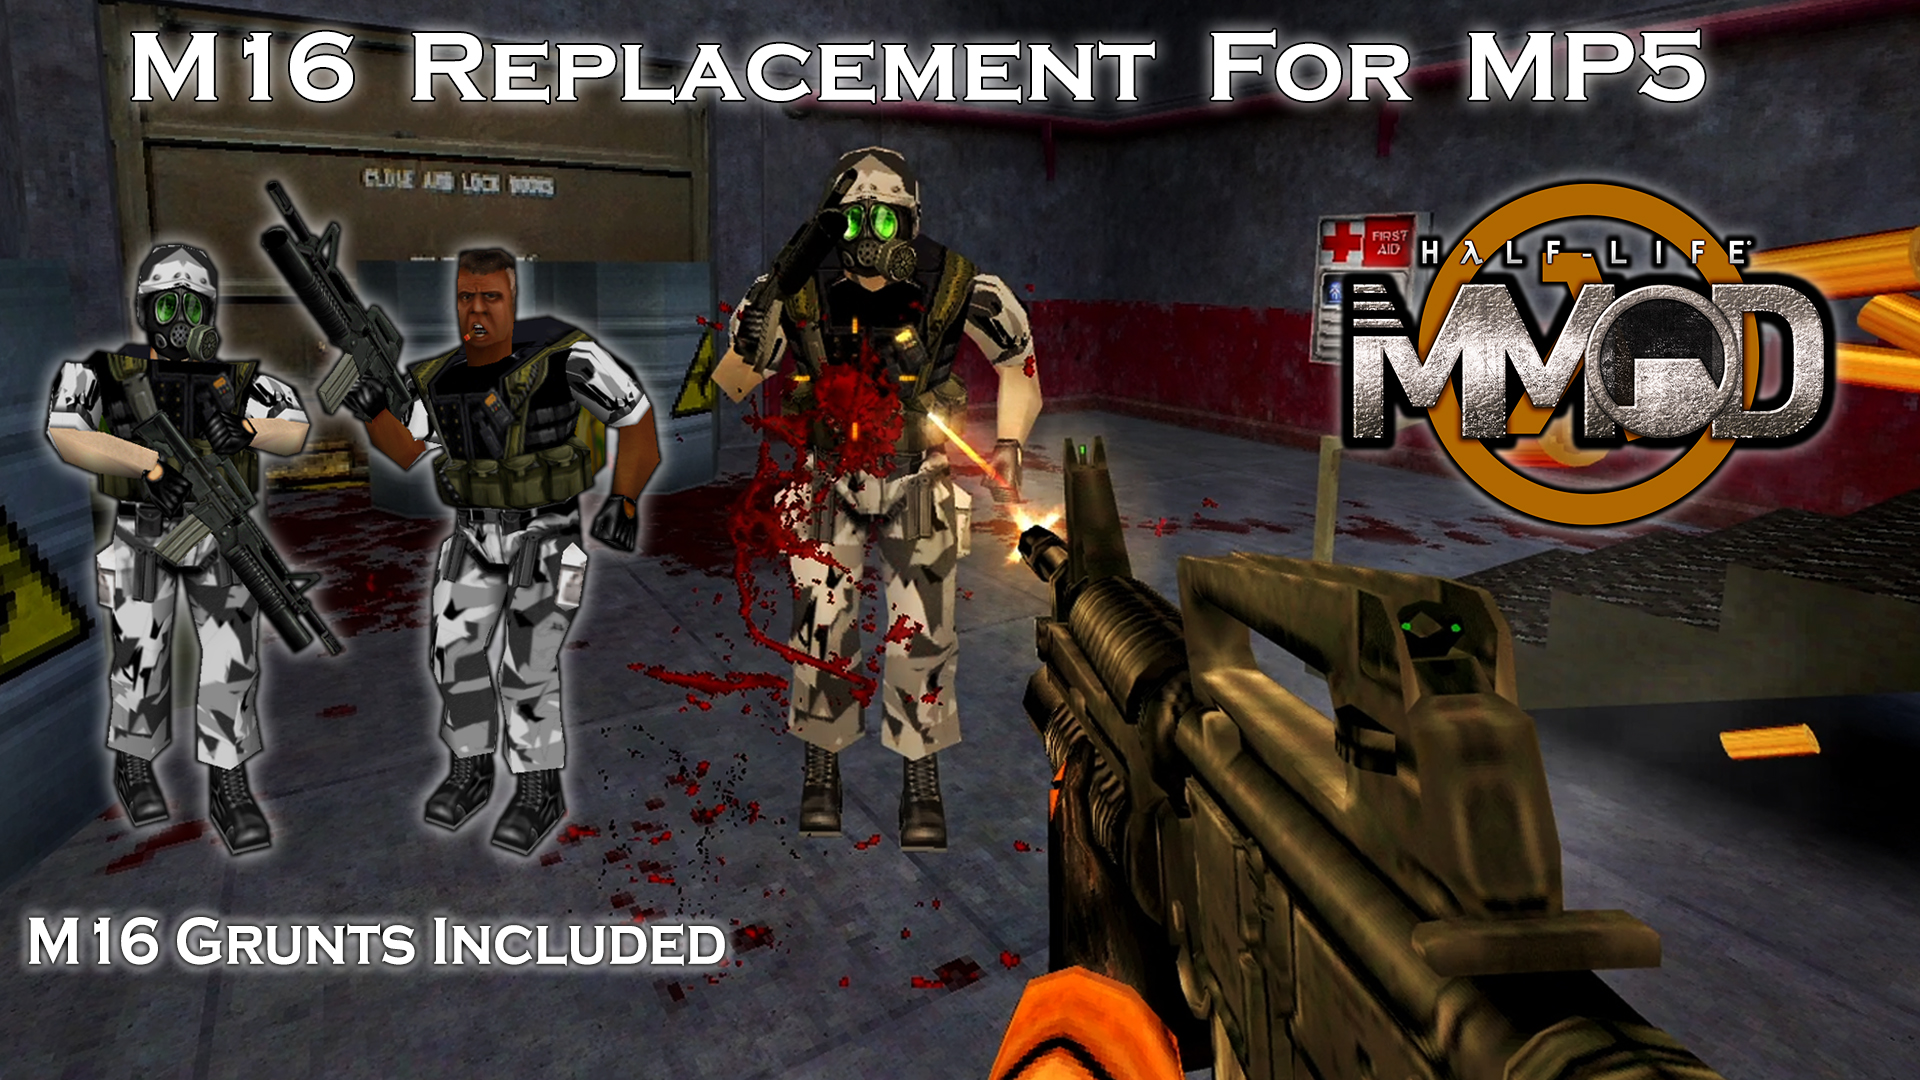 MMOD M16 Replacement For MP5 addon - Half-Life - ModDB